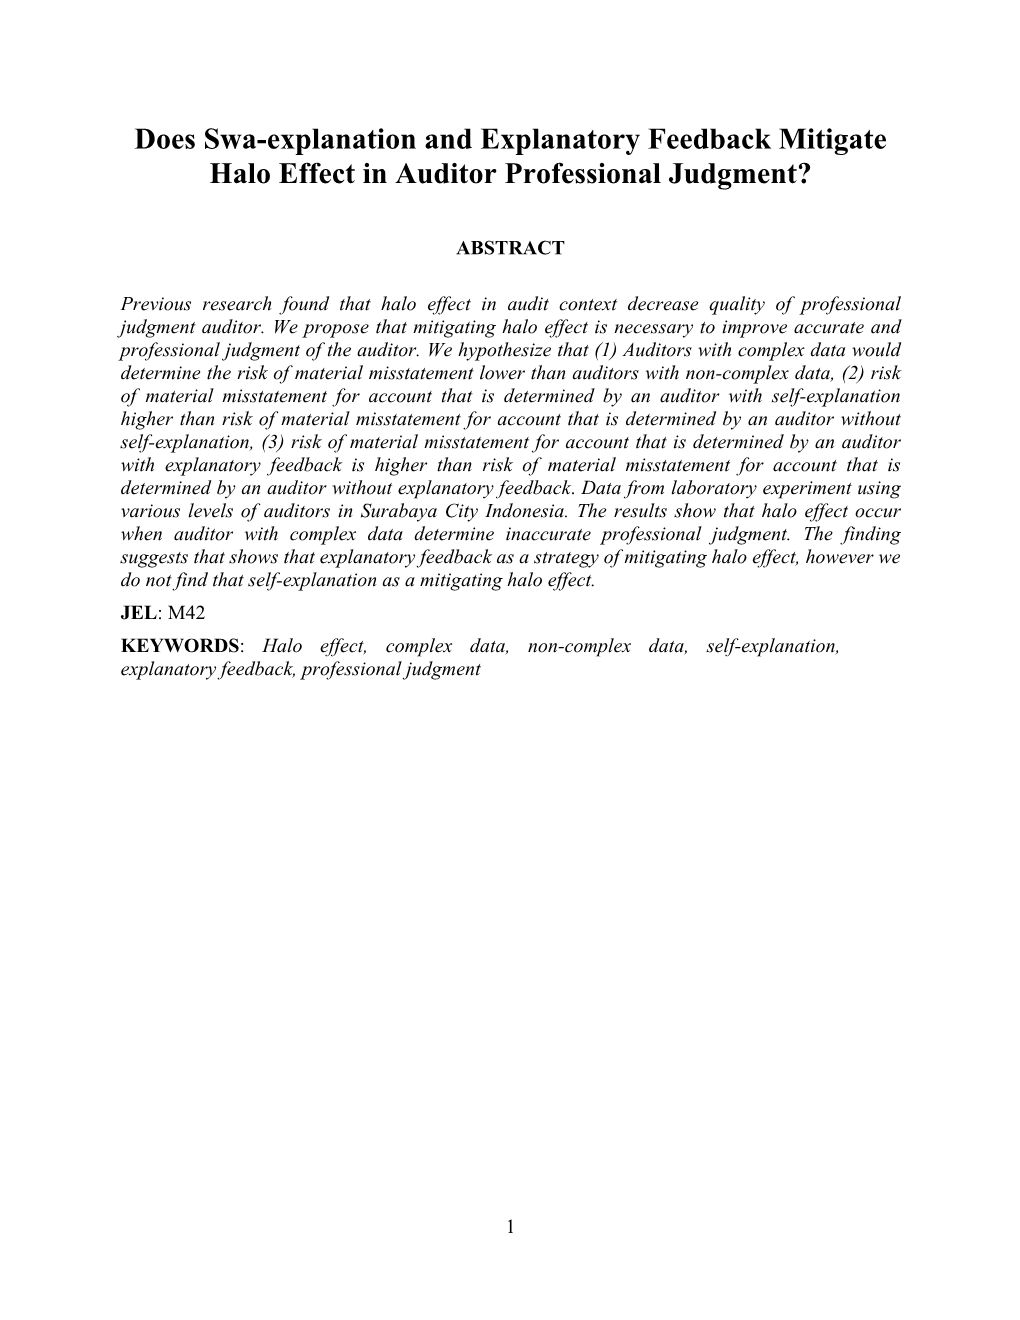 Does Swa-Explanation and Explanatory Feedback Mitigate Halo Effect in Auditor Professional Judgment?